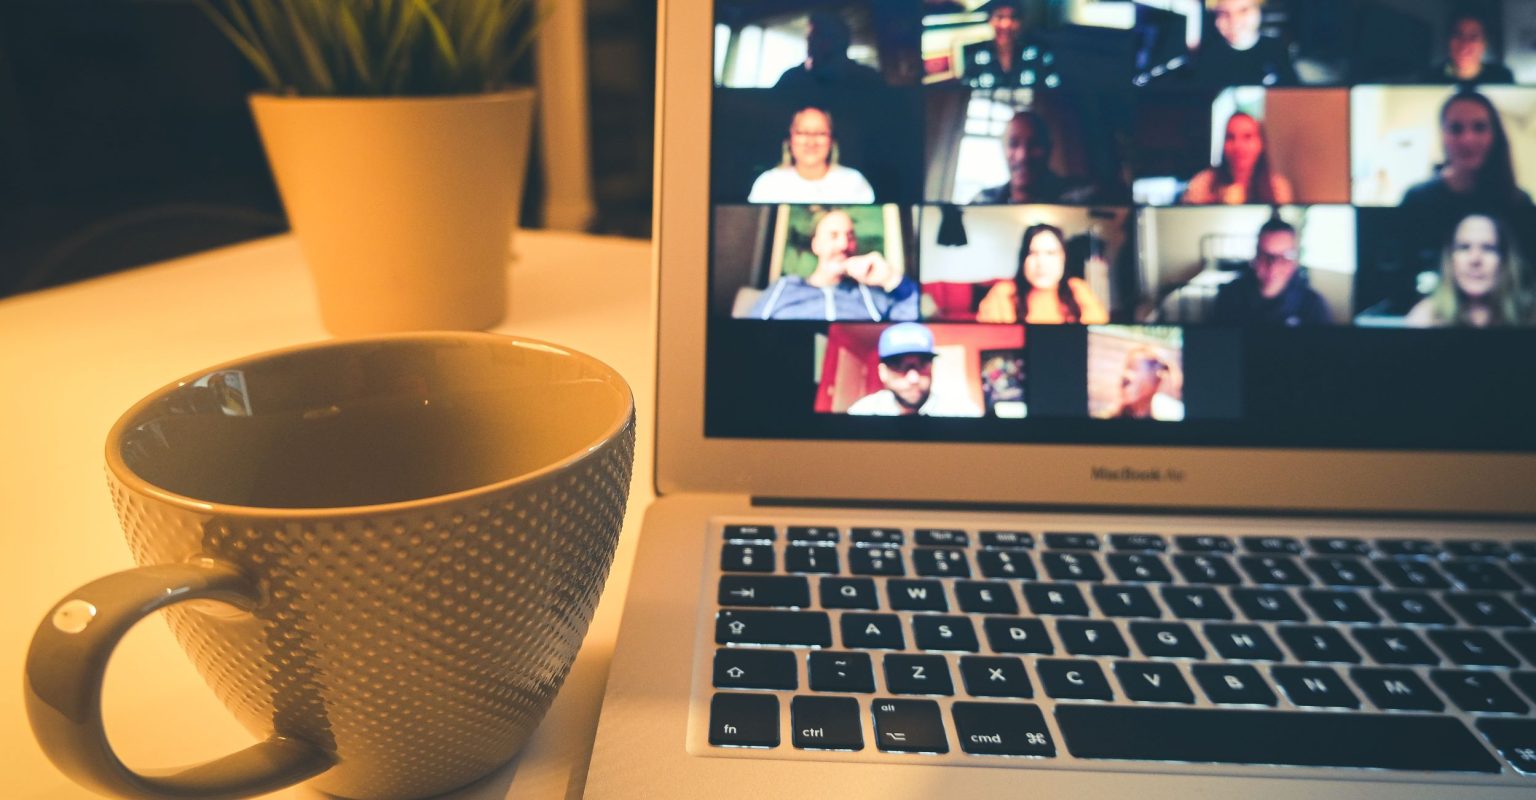 A laptop sitting on a table next to a mug of tea. The laptop screen is showing a Zoom meeting with multiple participants.